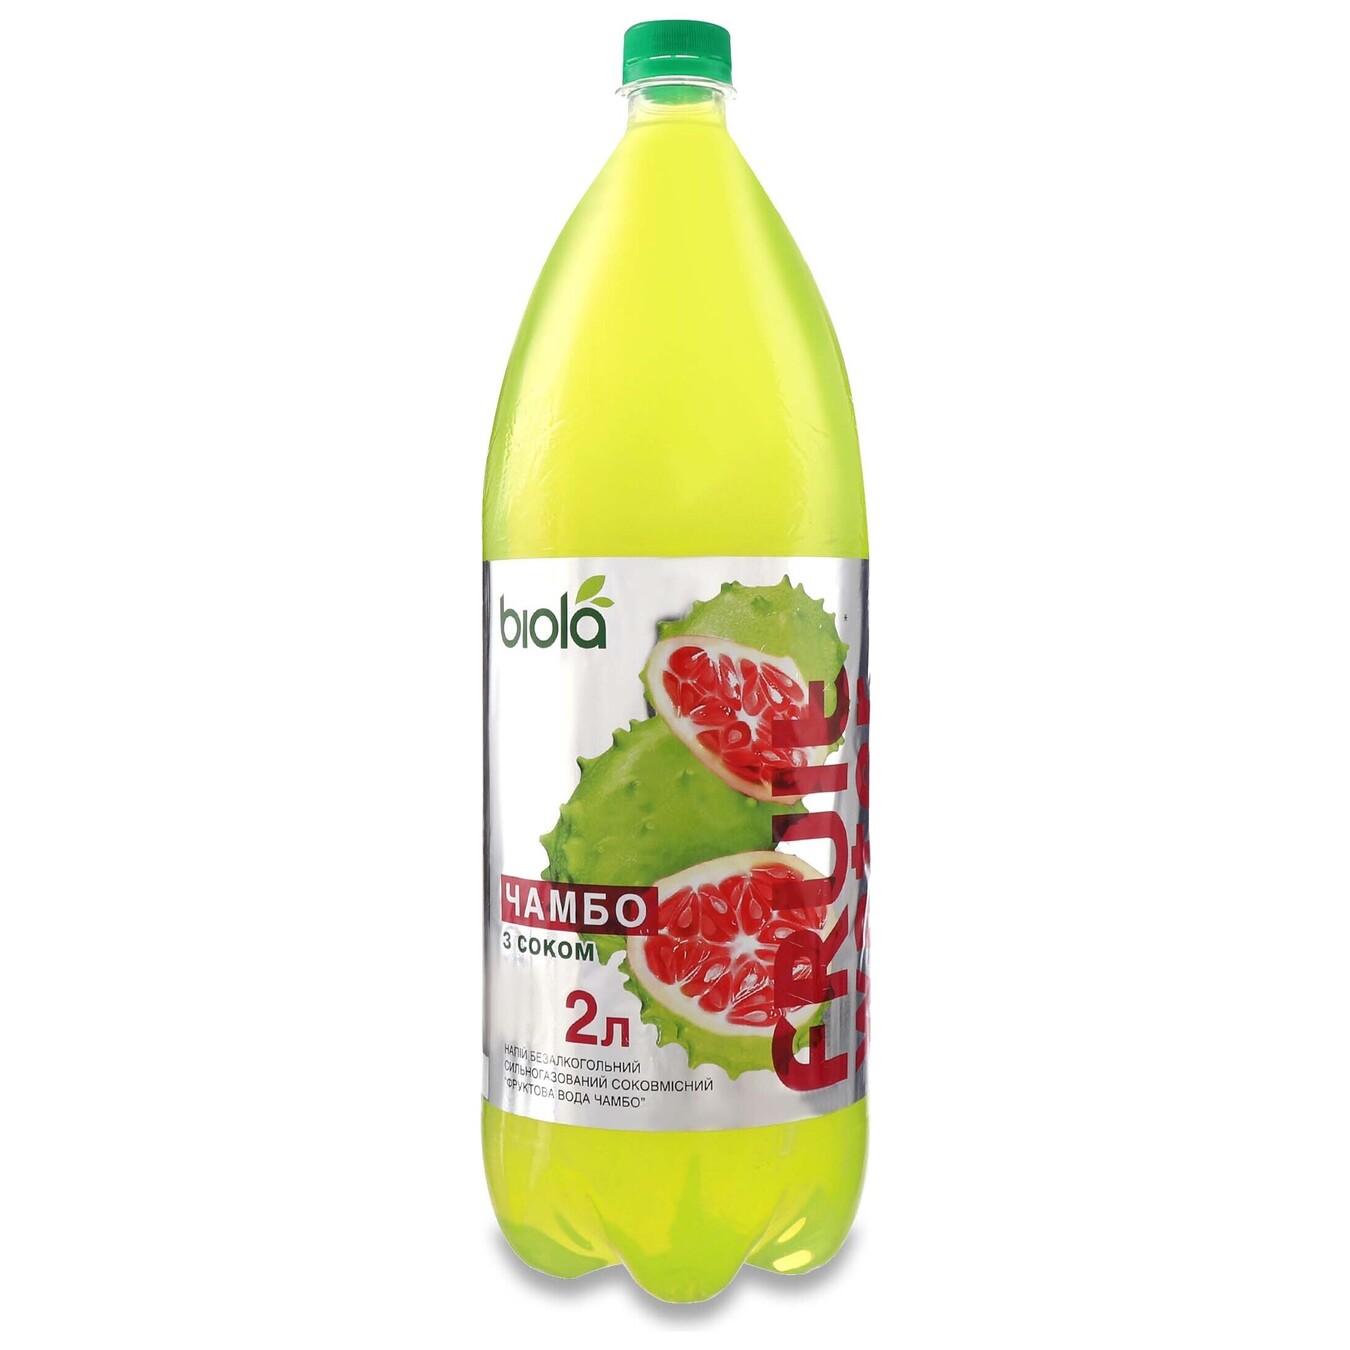 Biola Carbonated drink Chambo 2 l